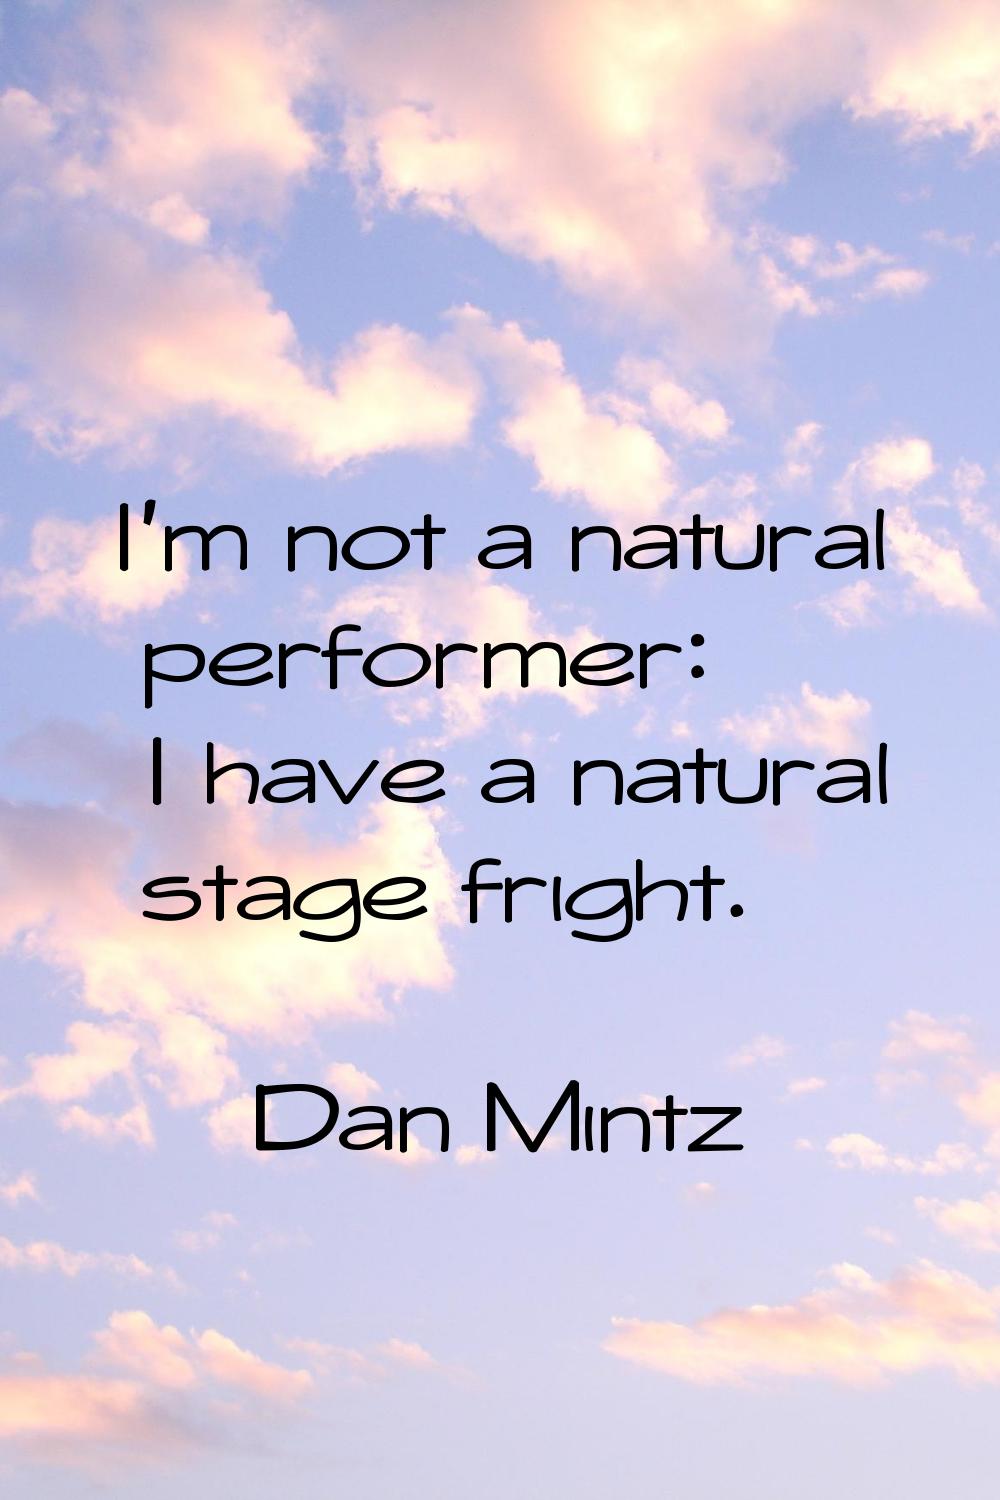 I'm not a natural performer: I have a natural stage fright.